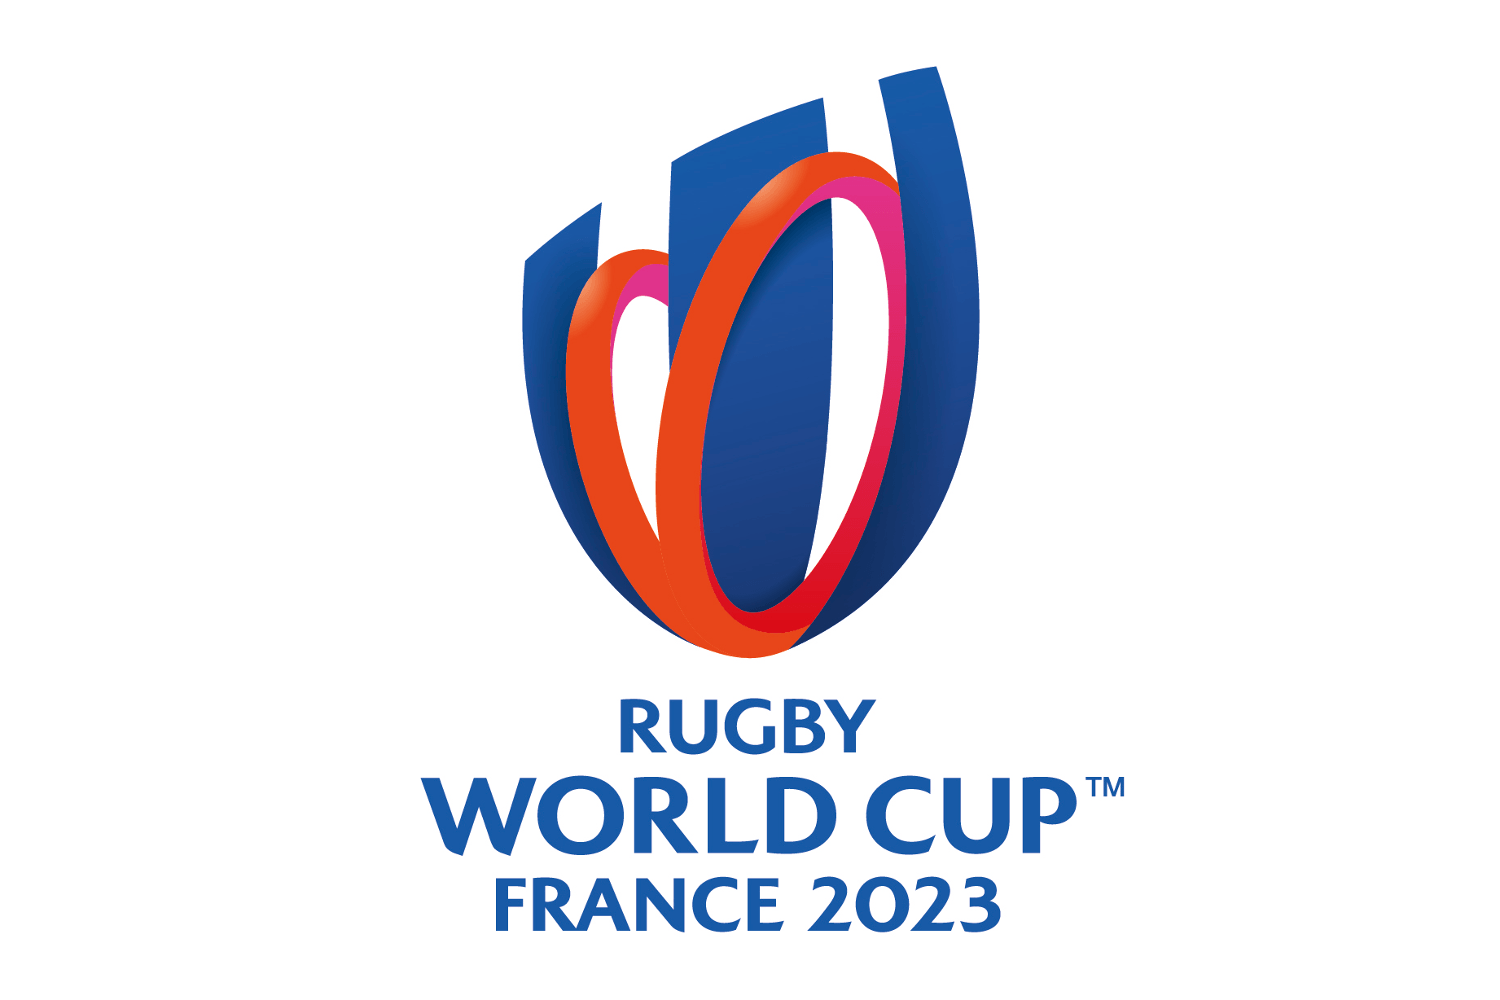 Rugby Logo - Striking new logo and brand identity launched for Rugby World Cup